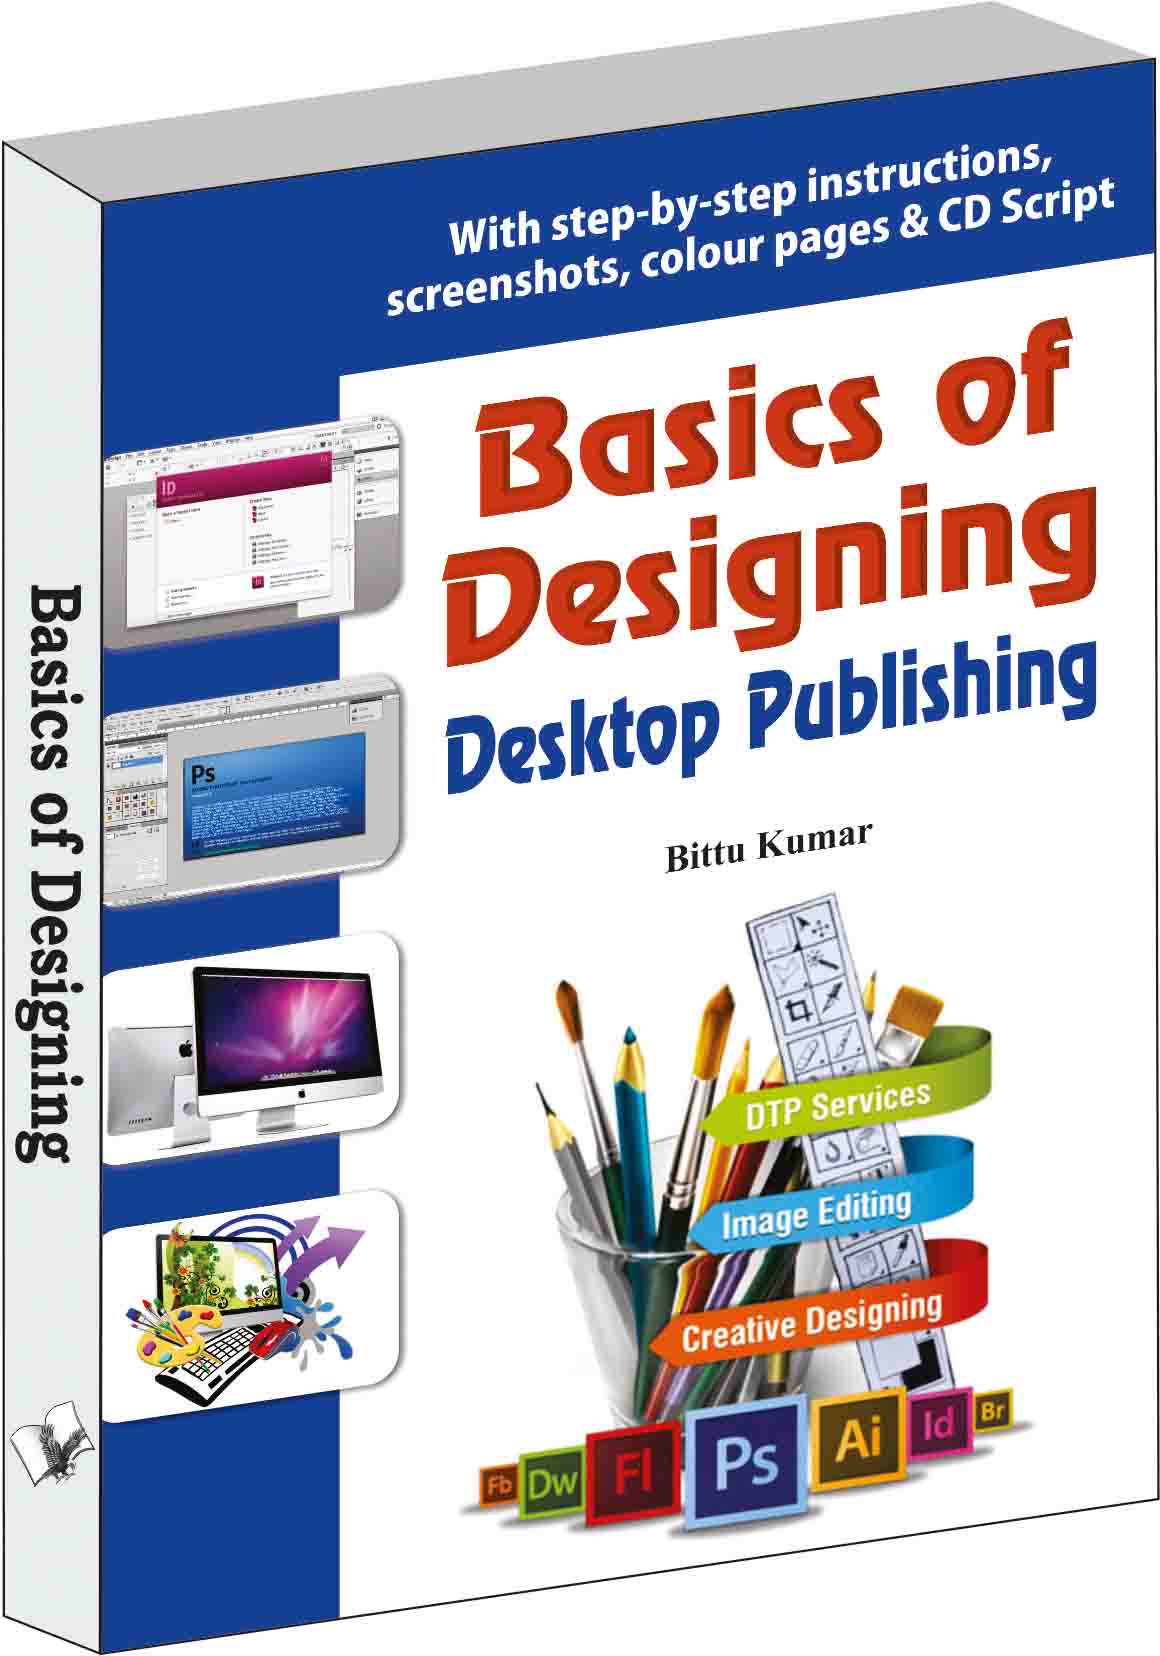 Basics of Designing - Desktop Publishing -With step-by-step instructions, 
screenshots, colour pages & CD Script